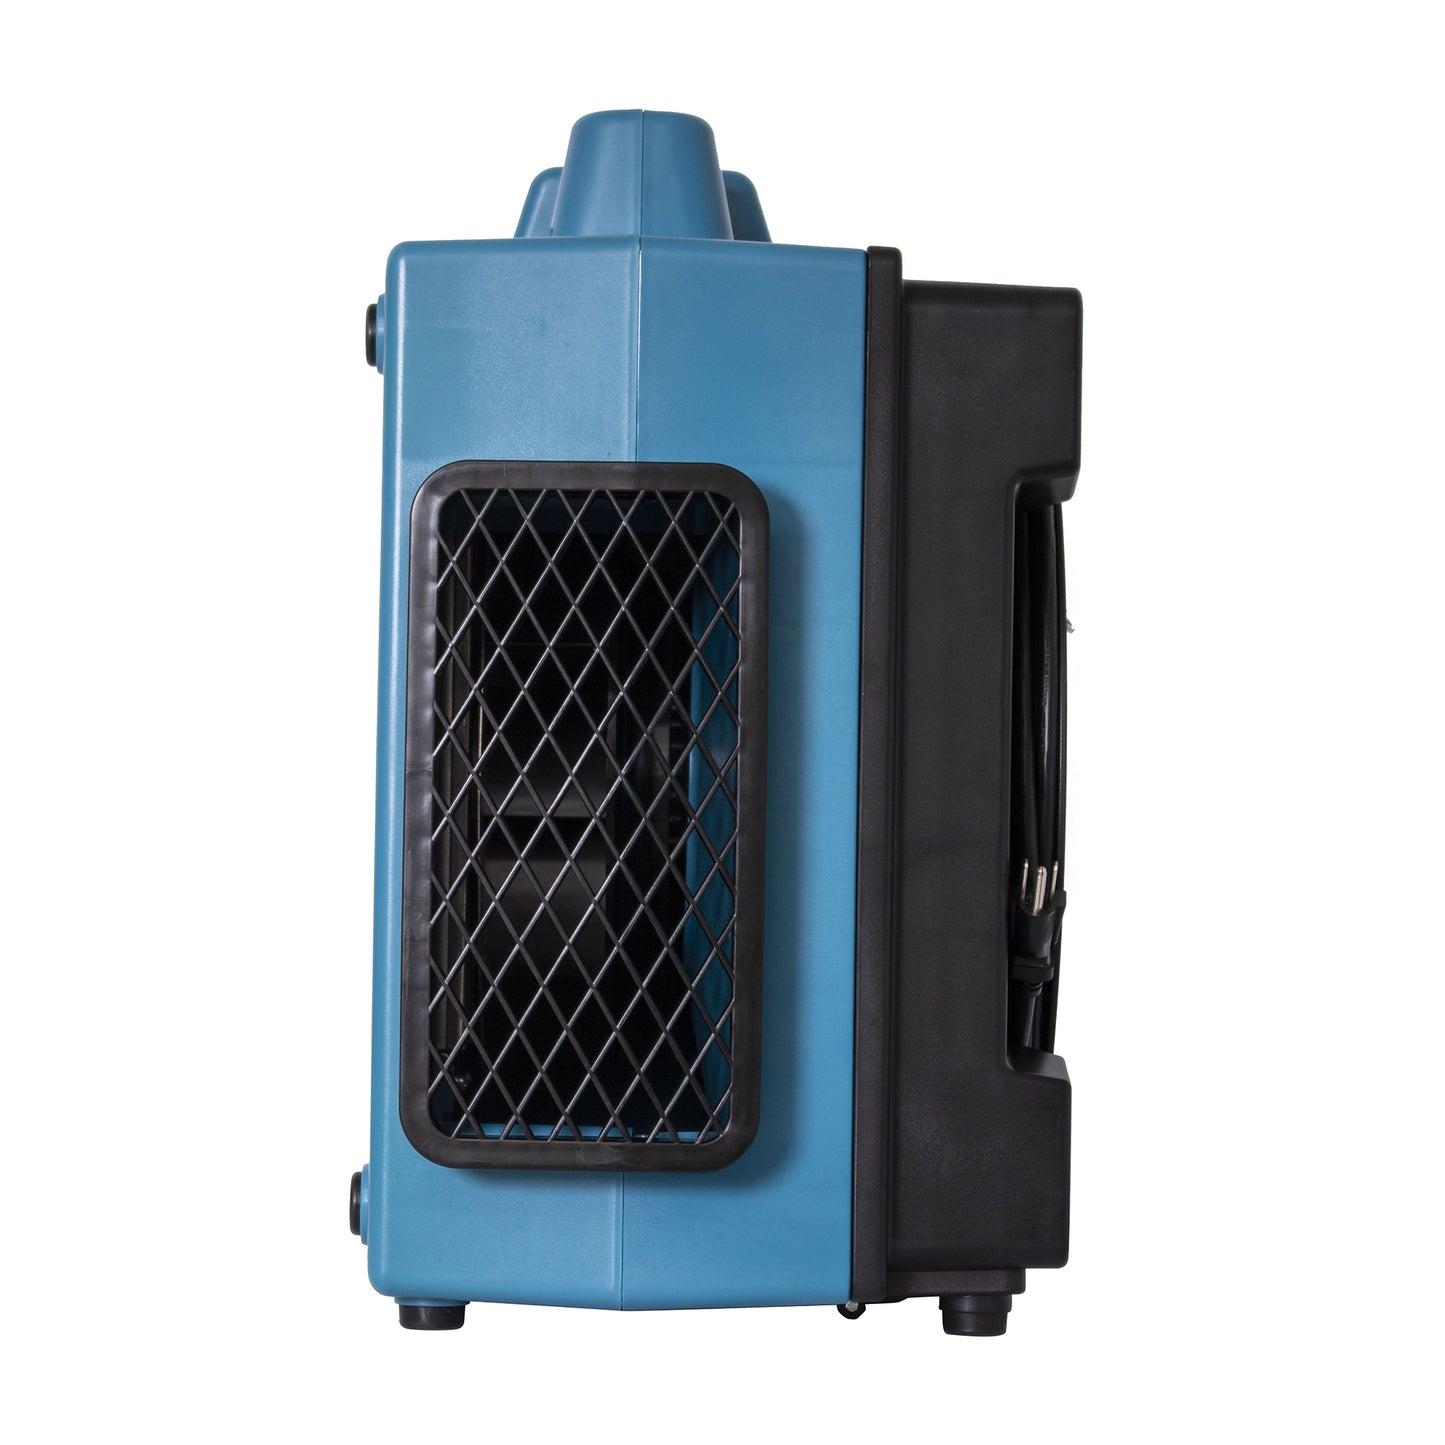 XPOWER X-4700AM Commercial Air Scrubber, 750 CFM, Multi-Layer HEPA Filtration, 8" Ducting